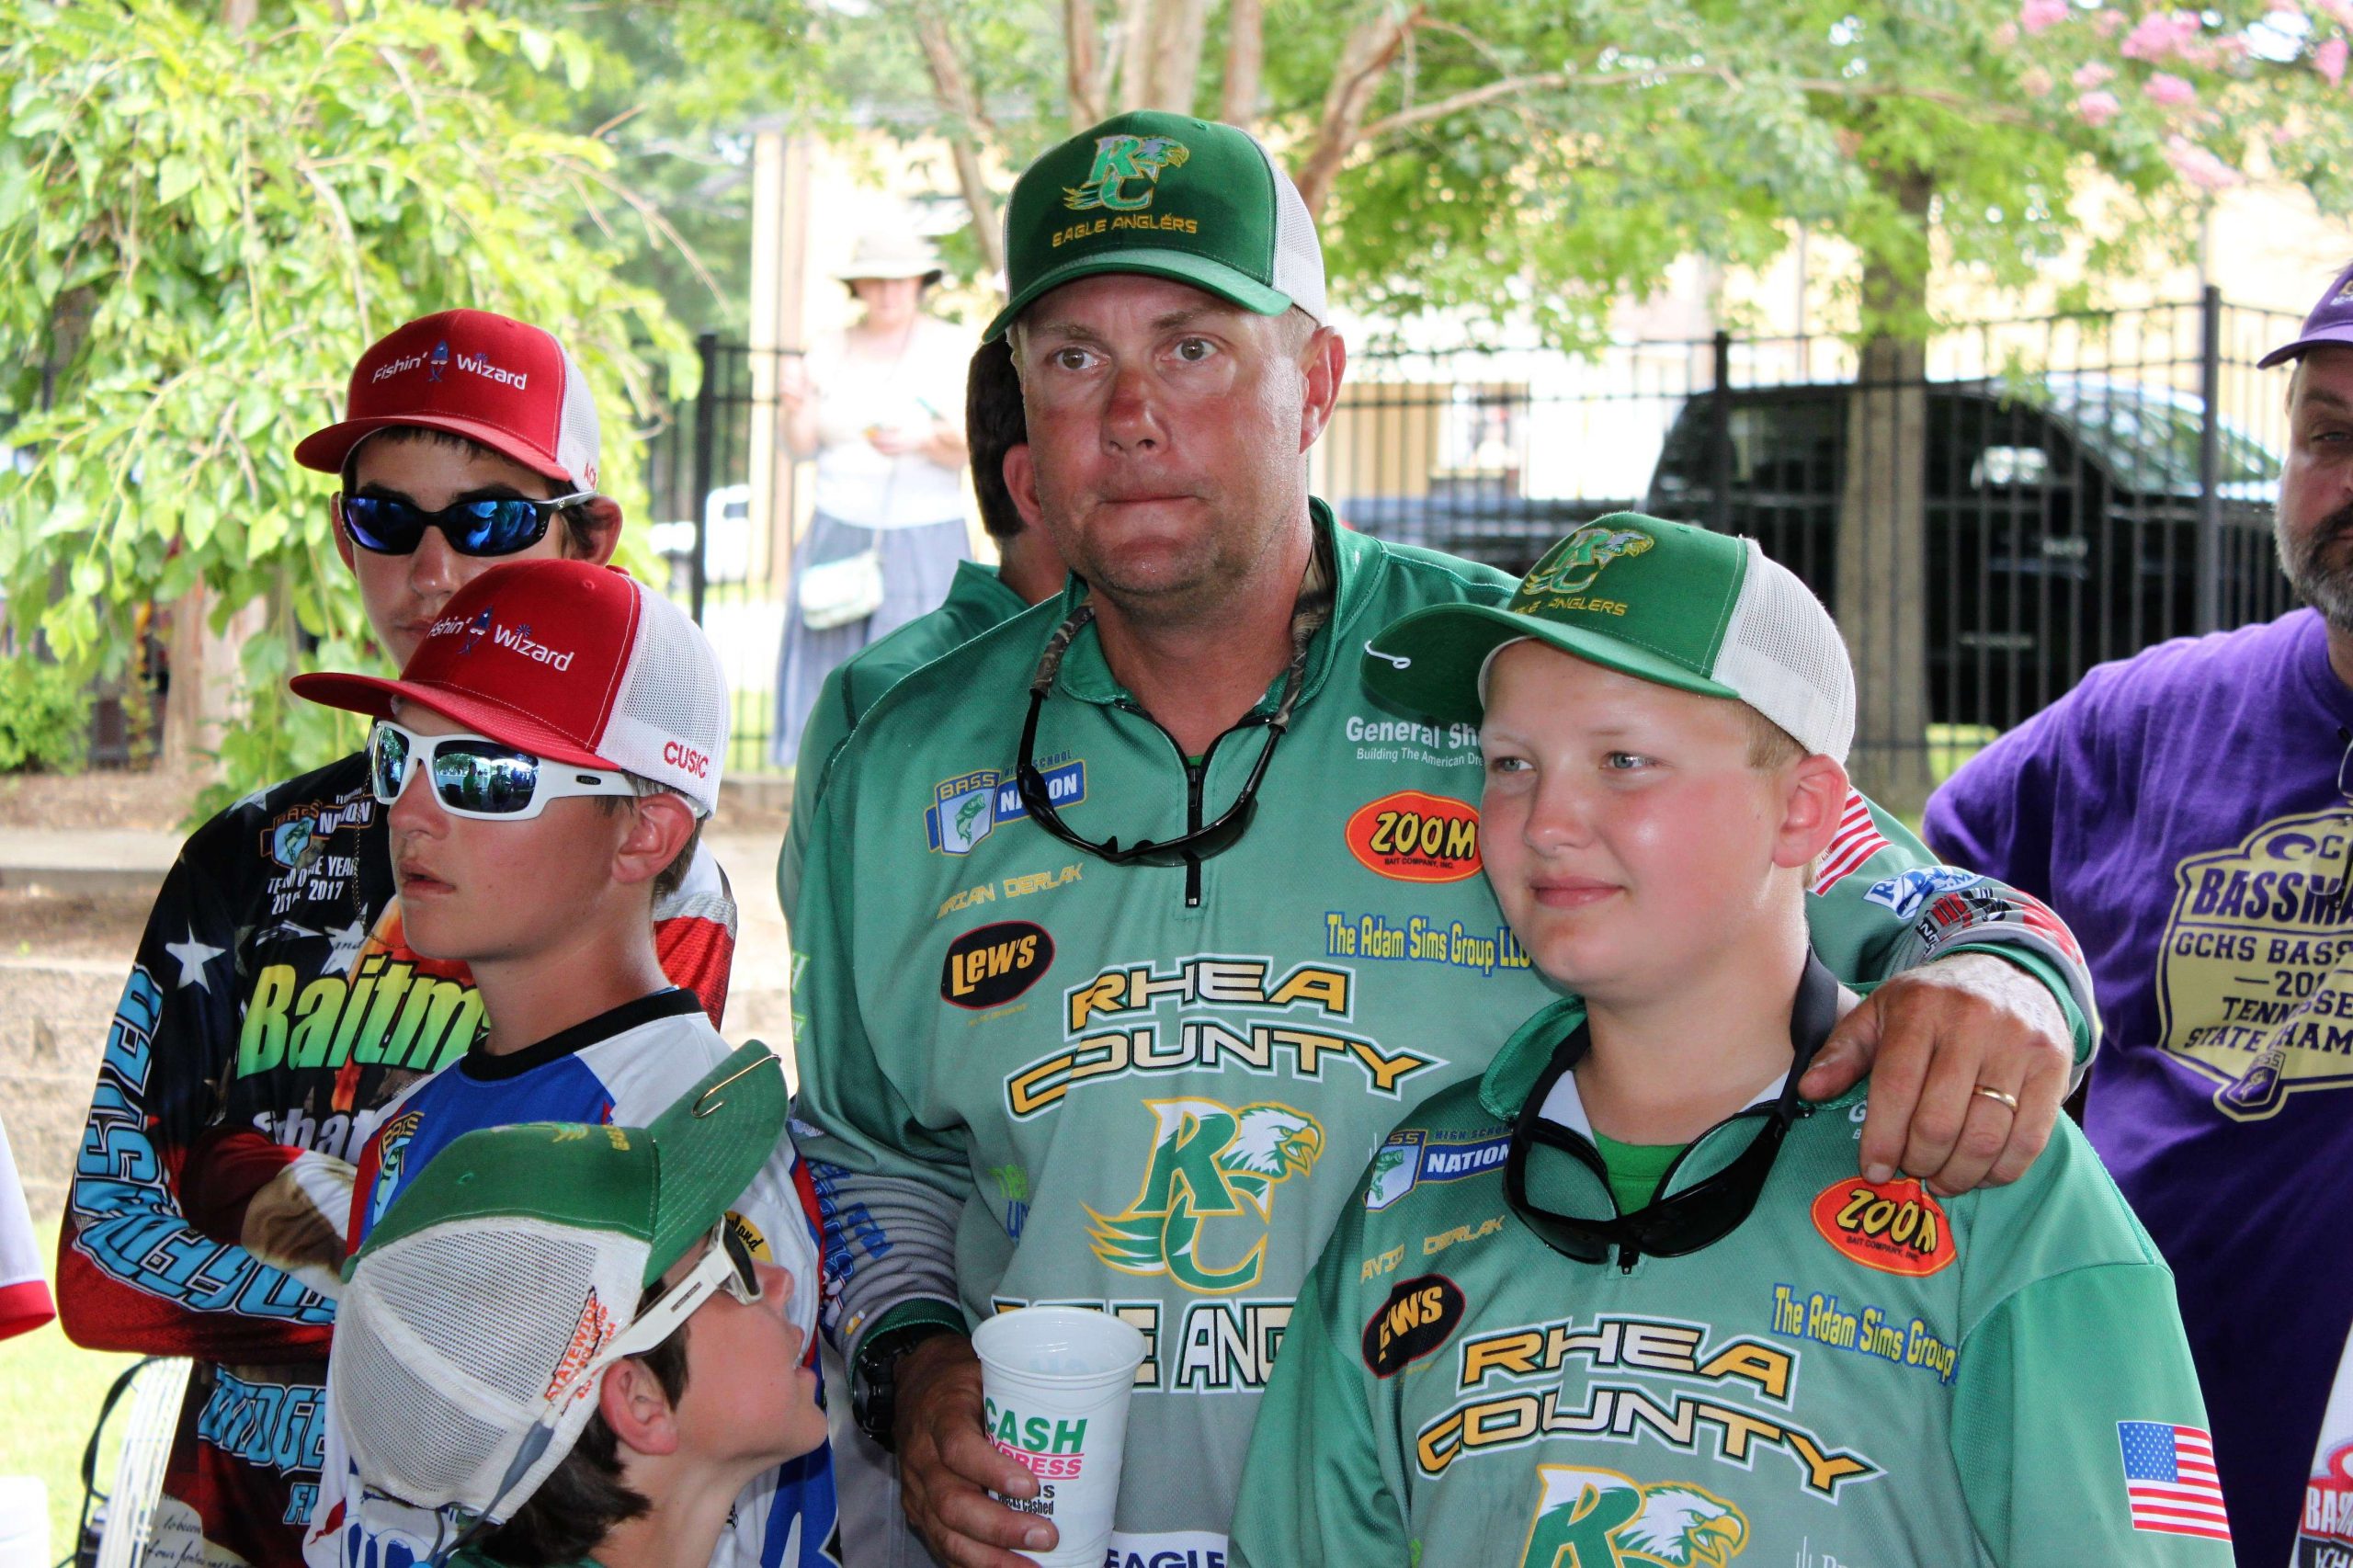 The backstage area is always interesting. Here it looks like Tennessee angler David Derlak, right, is at ease while his dad Brian is worried. No worries, though. Derlak took Bassmaters.com crew out on the Carroll County 1,000 Acre Recreation Lake on Wednesday to get a birdâs eye view of the juniors doing their thing.
